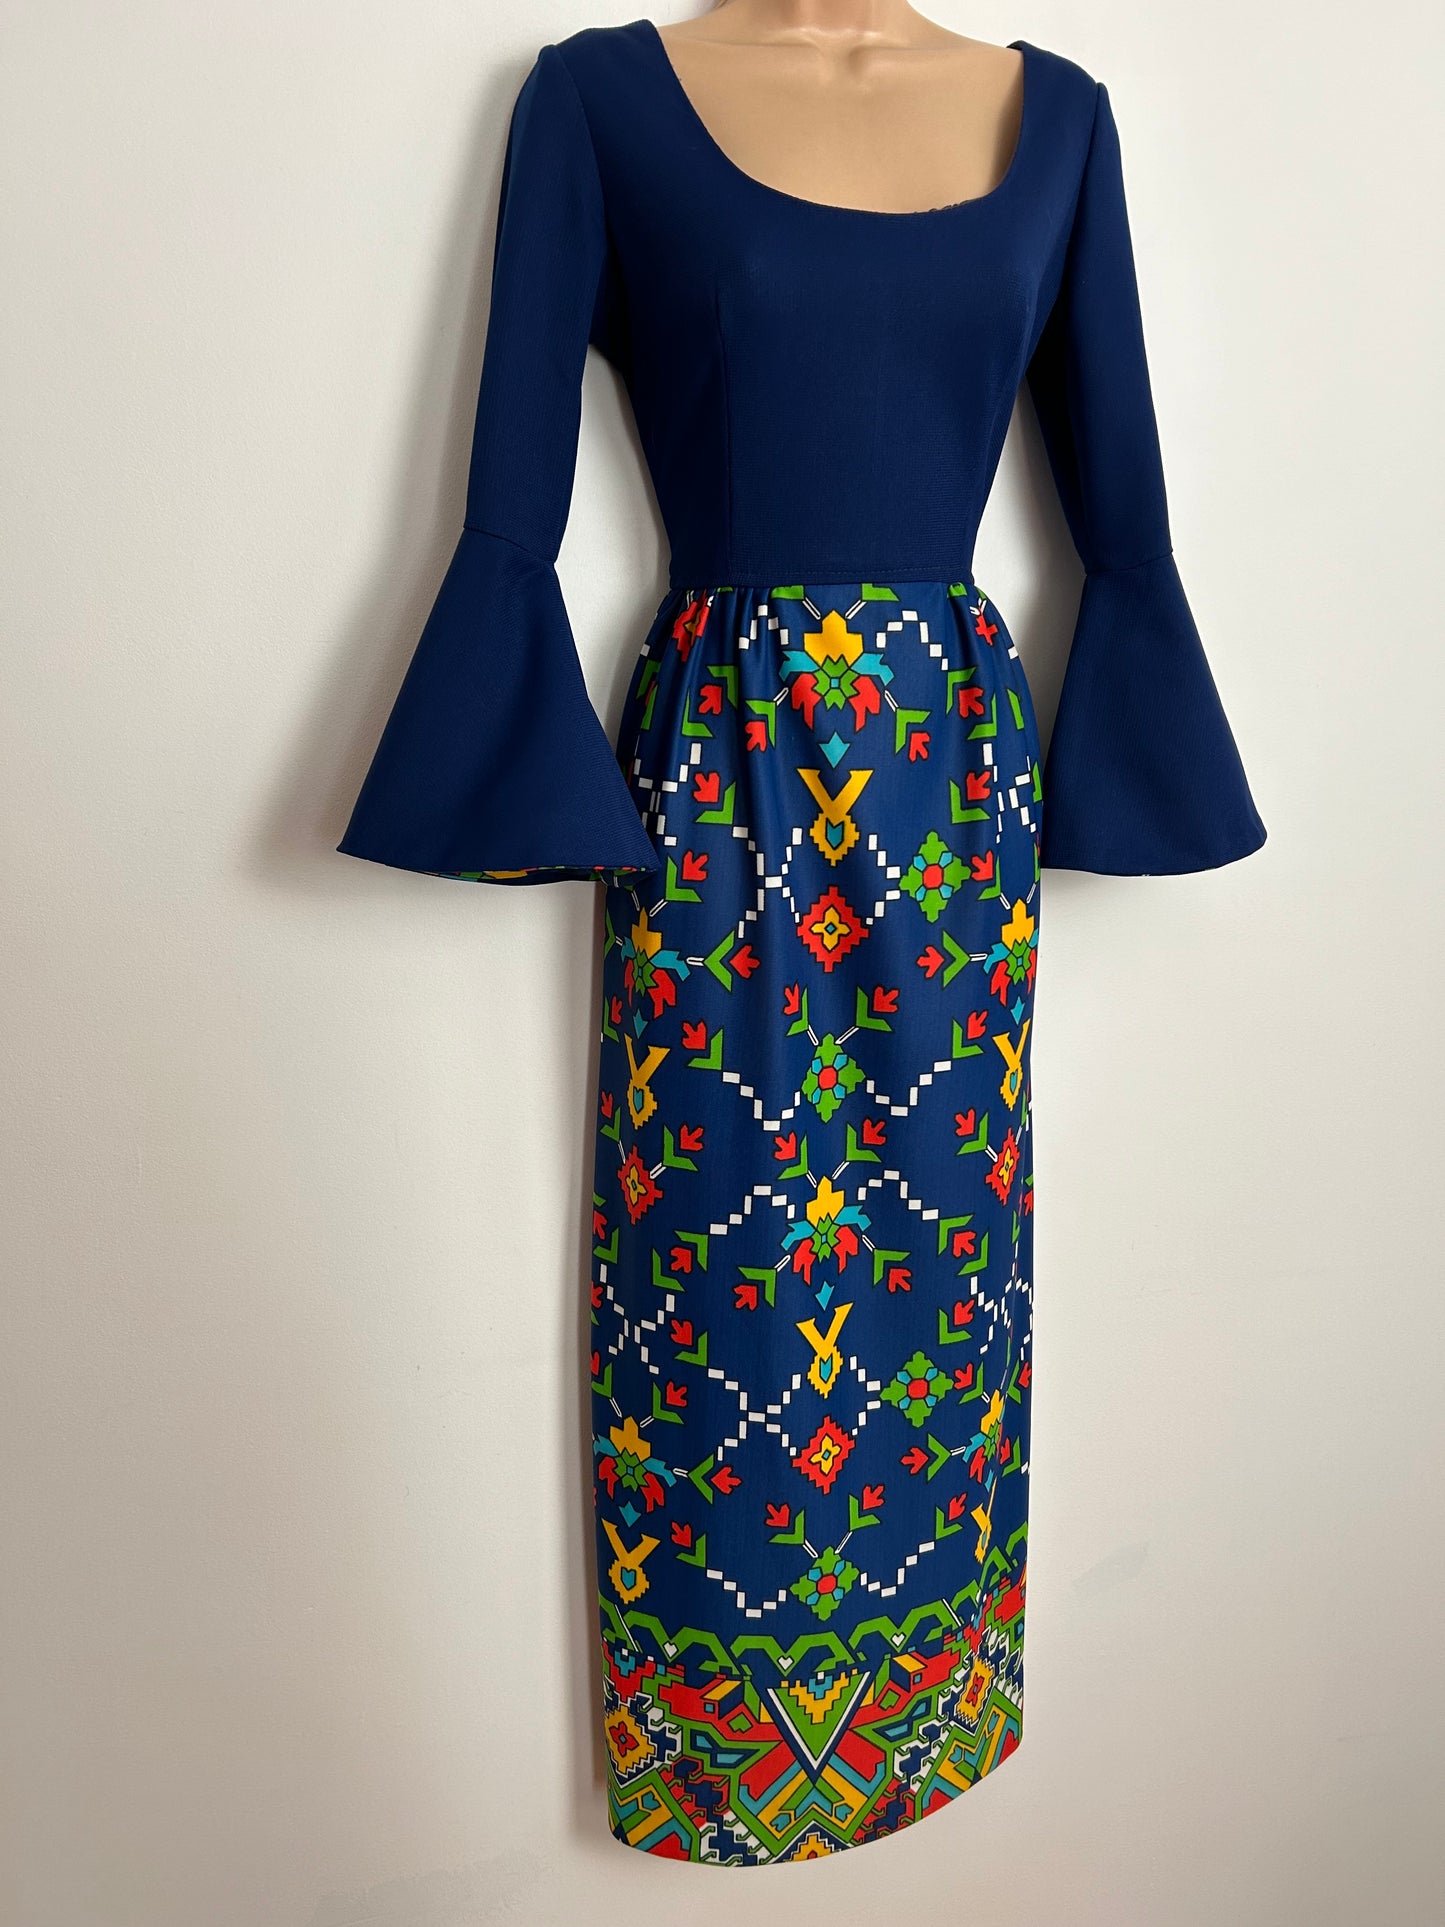 Vintage 1970s UK Size 10 Navy Blue Red Green Yellow & Blue Asbtract Geo Print Flared Cuff Maxi Dress